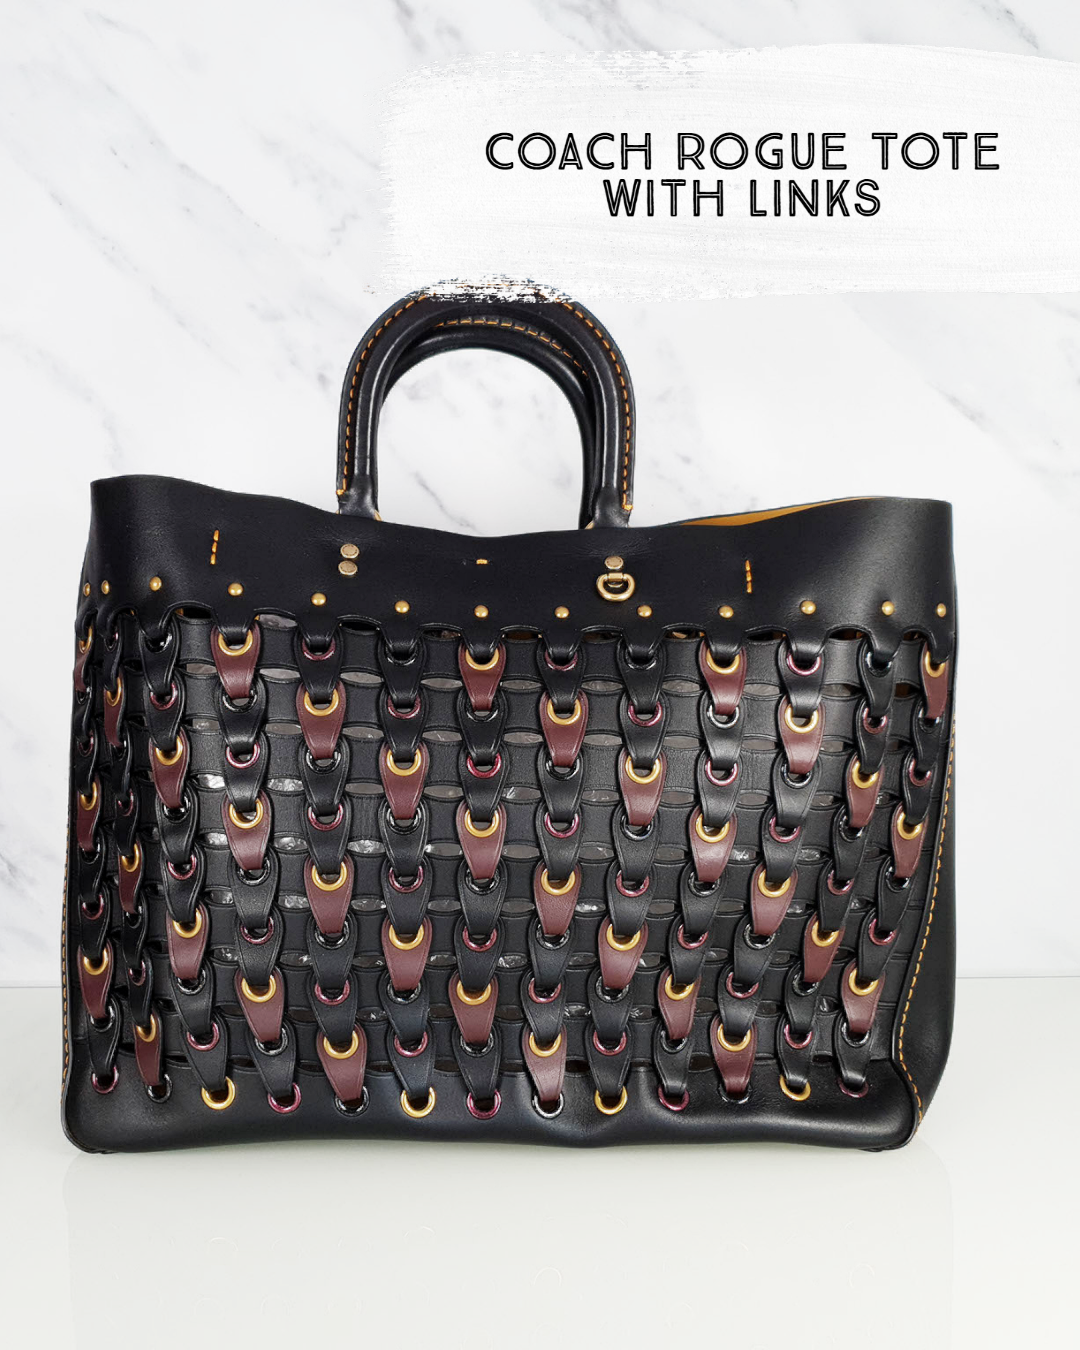 Coach Rogue Tote with Links in Black & Burgundy - Essex Fashion House